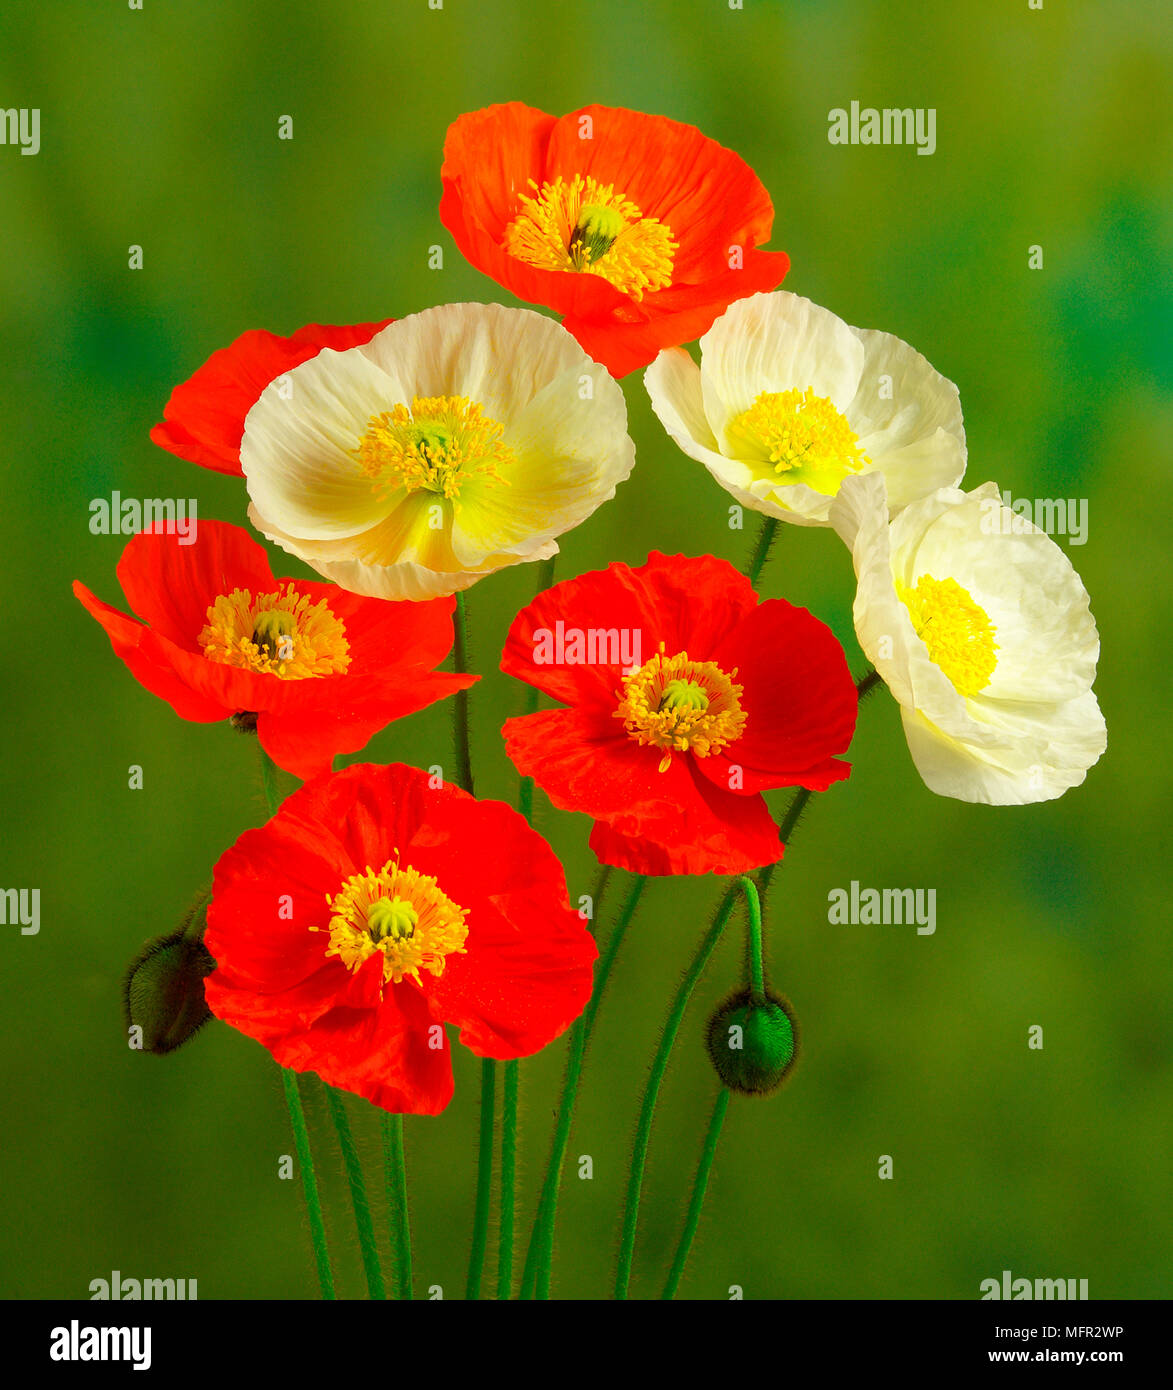 Delicate Icelandic poppies with bowl-shaped flowers, showing their bright yellow stamens and nodding hairy flower buds. Stock Photo